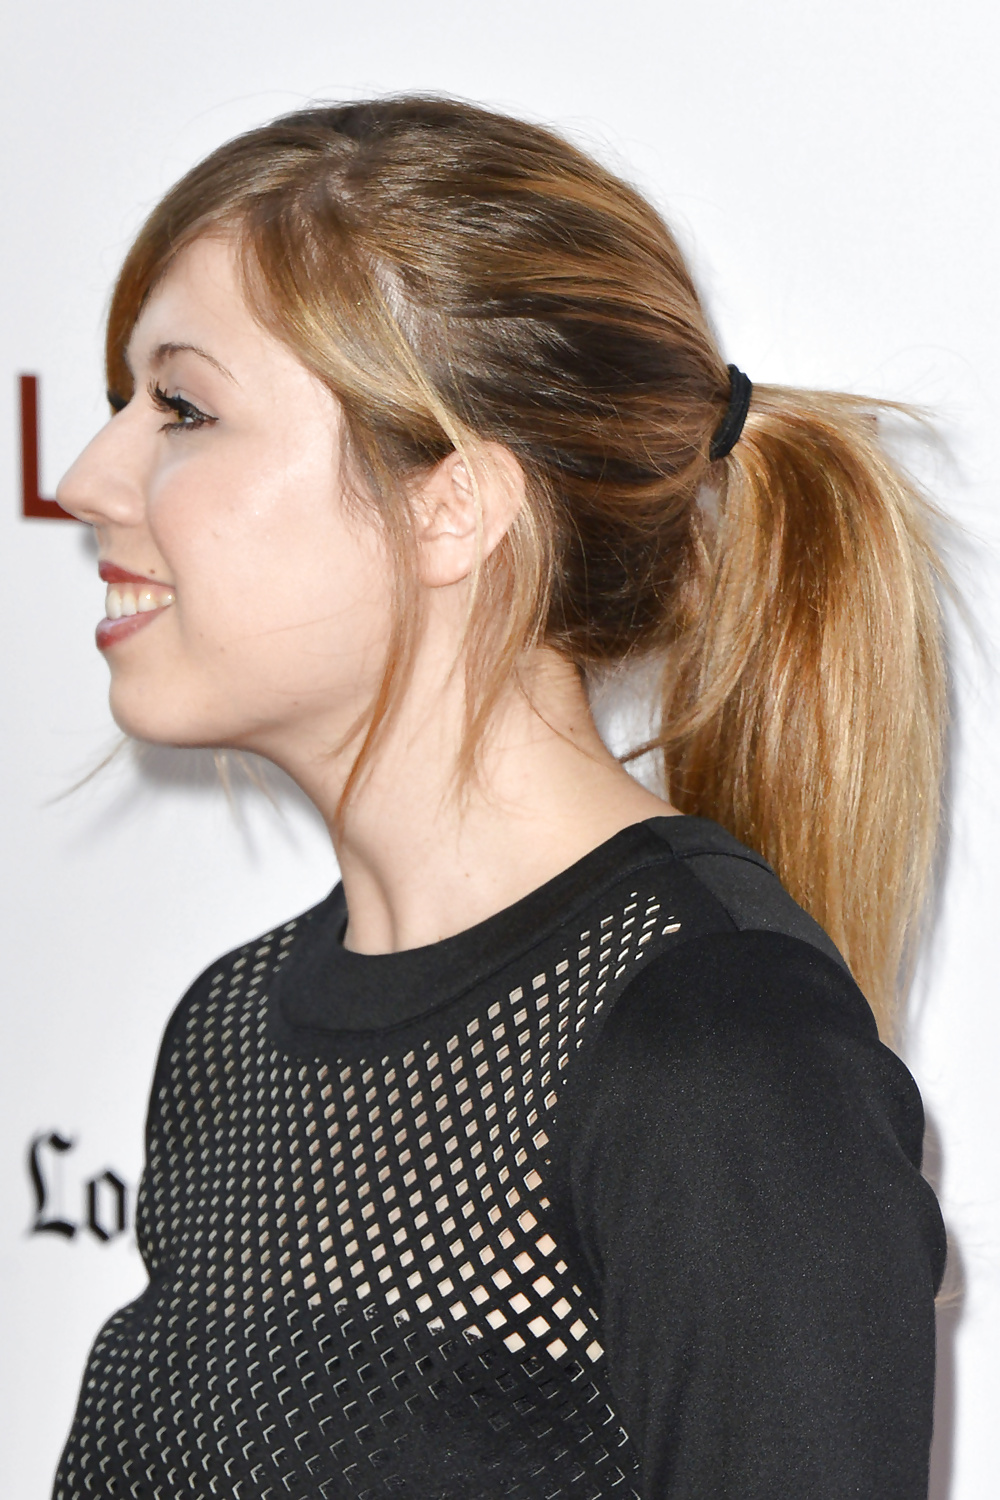 Jennette mccurdy - top nero e gonna rossa - icarly
 #28077866